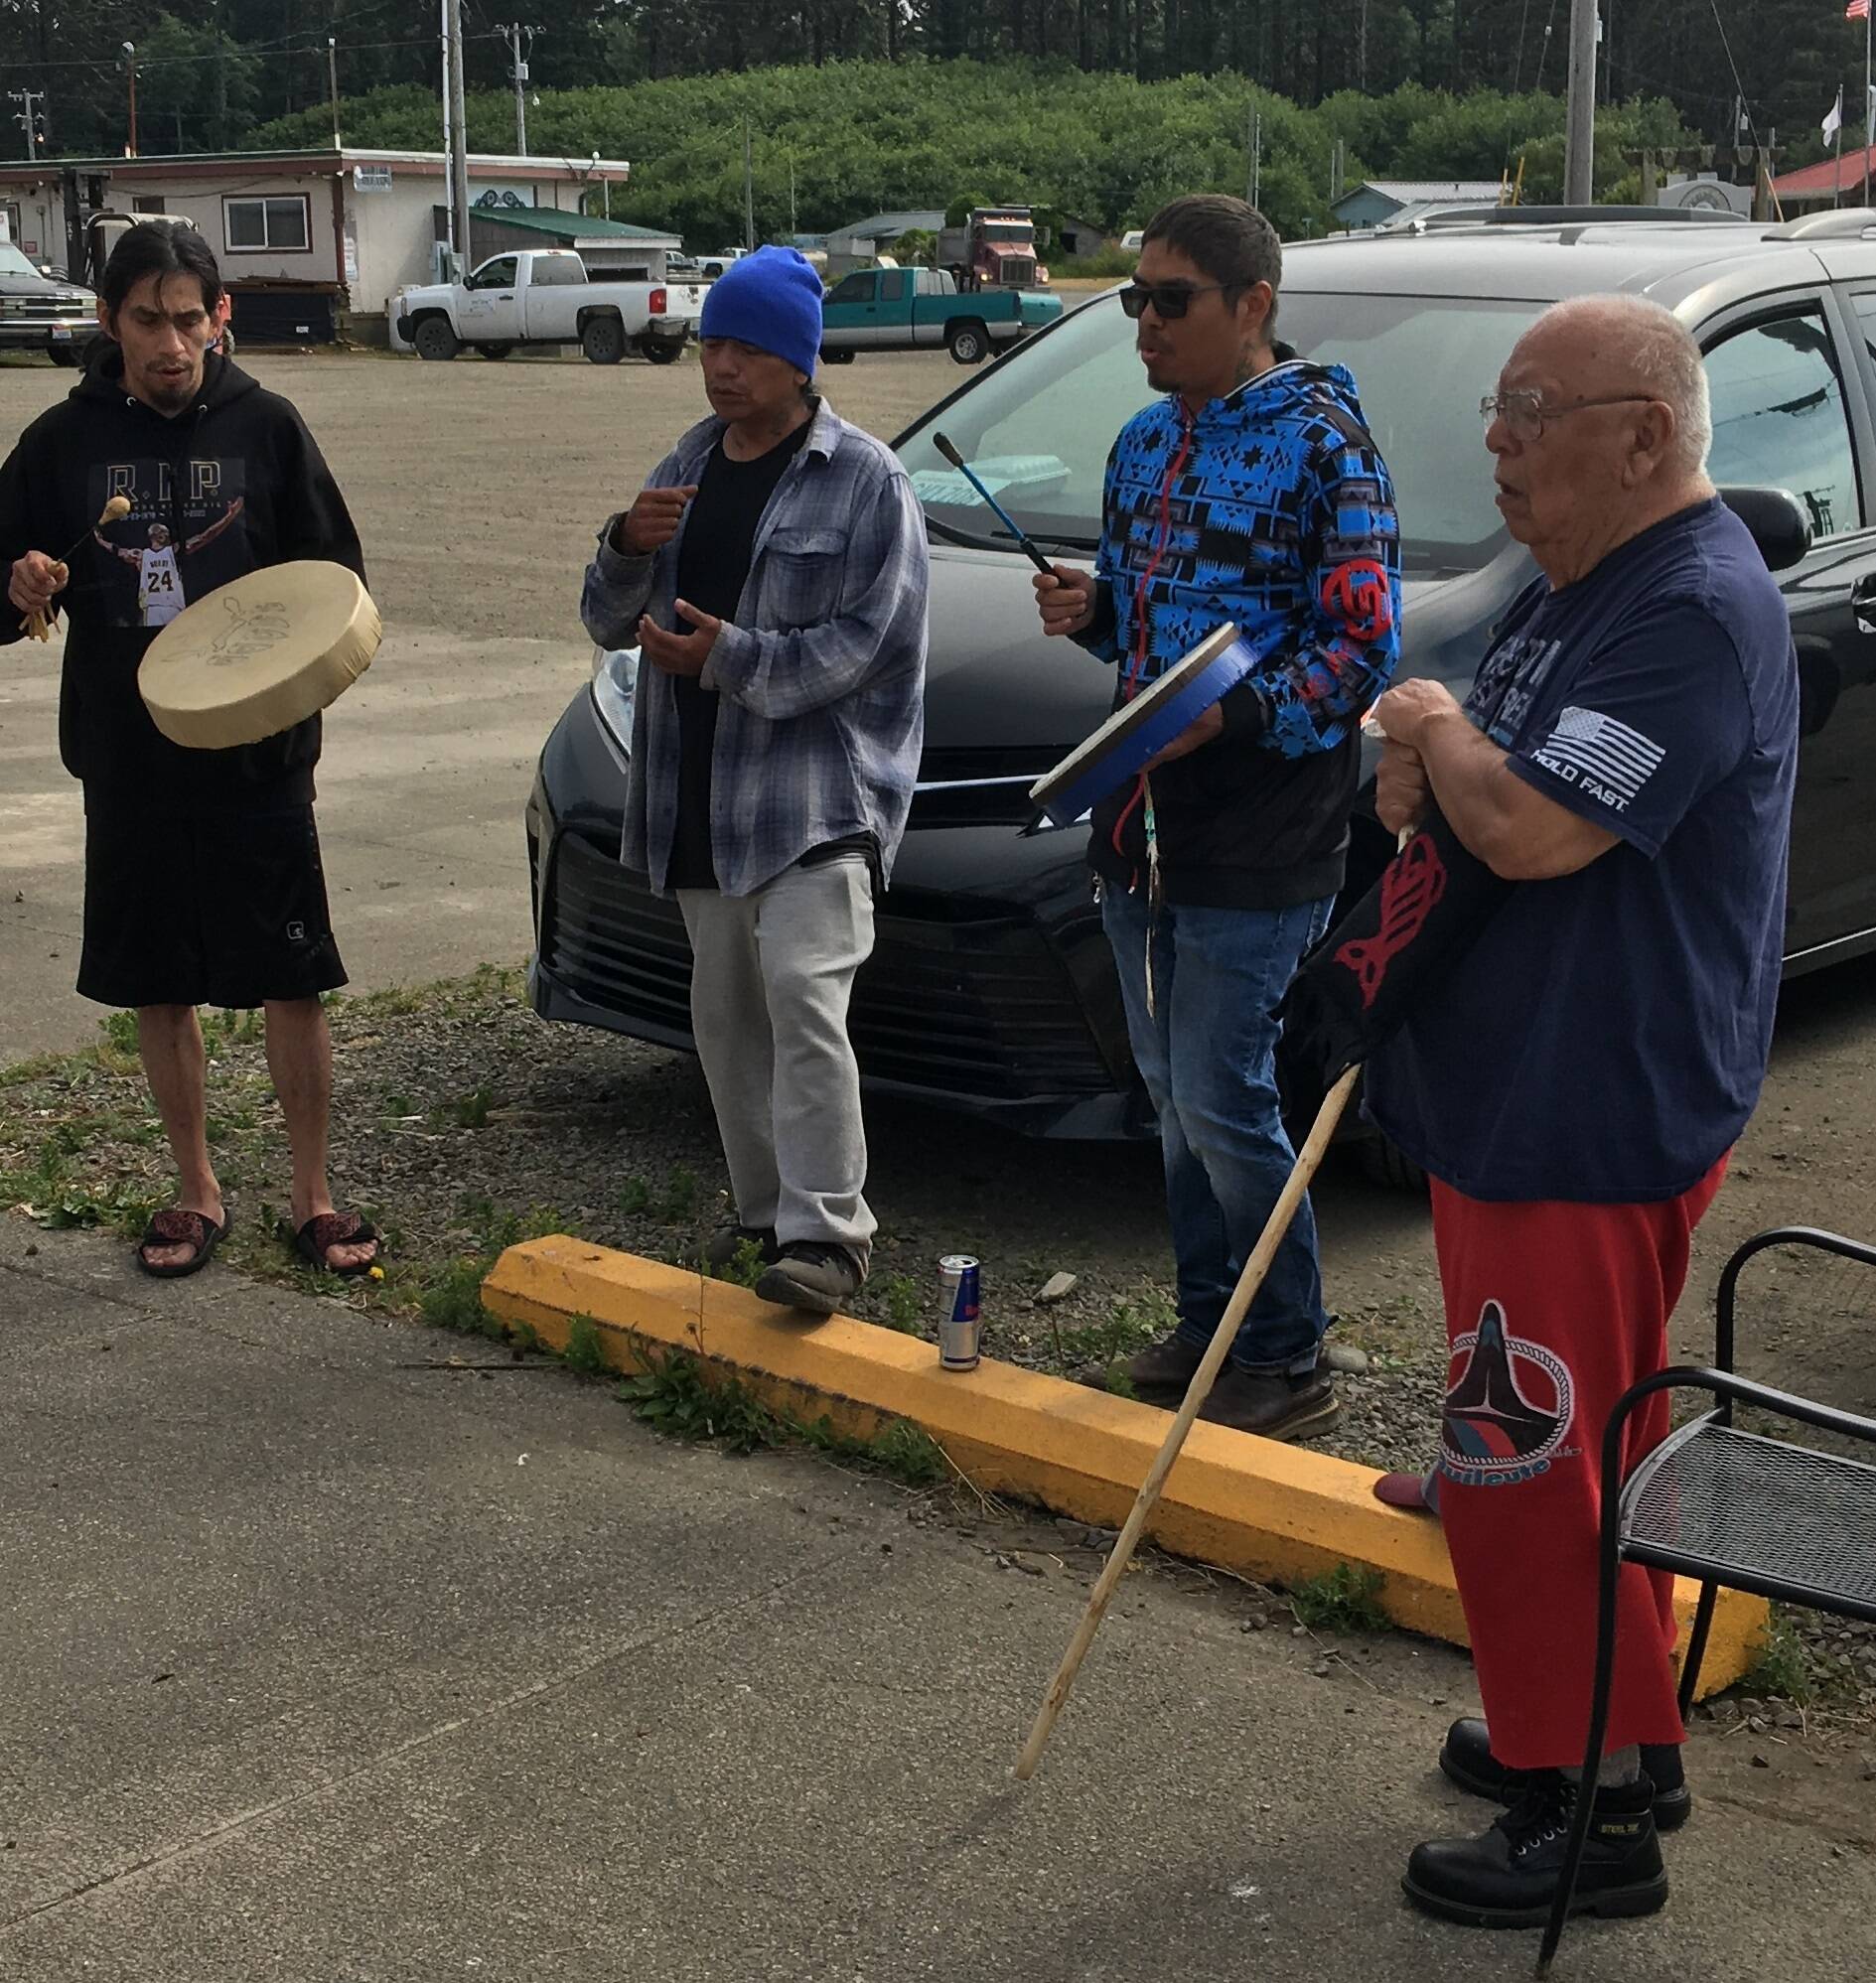 Quileute drummers welcomed Sainato along with Quileute Warrior Tom Jackson on Friday in La Push.